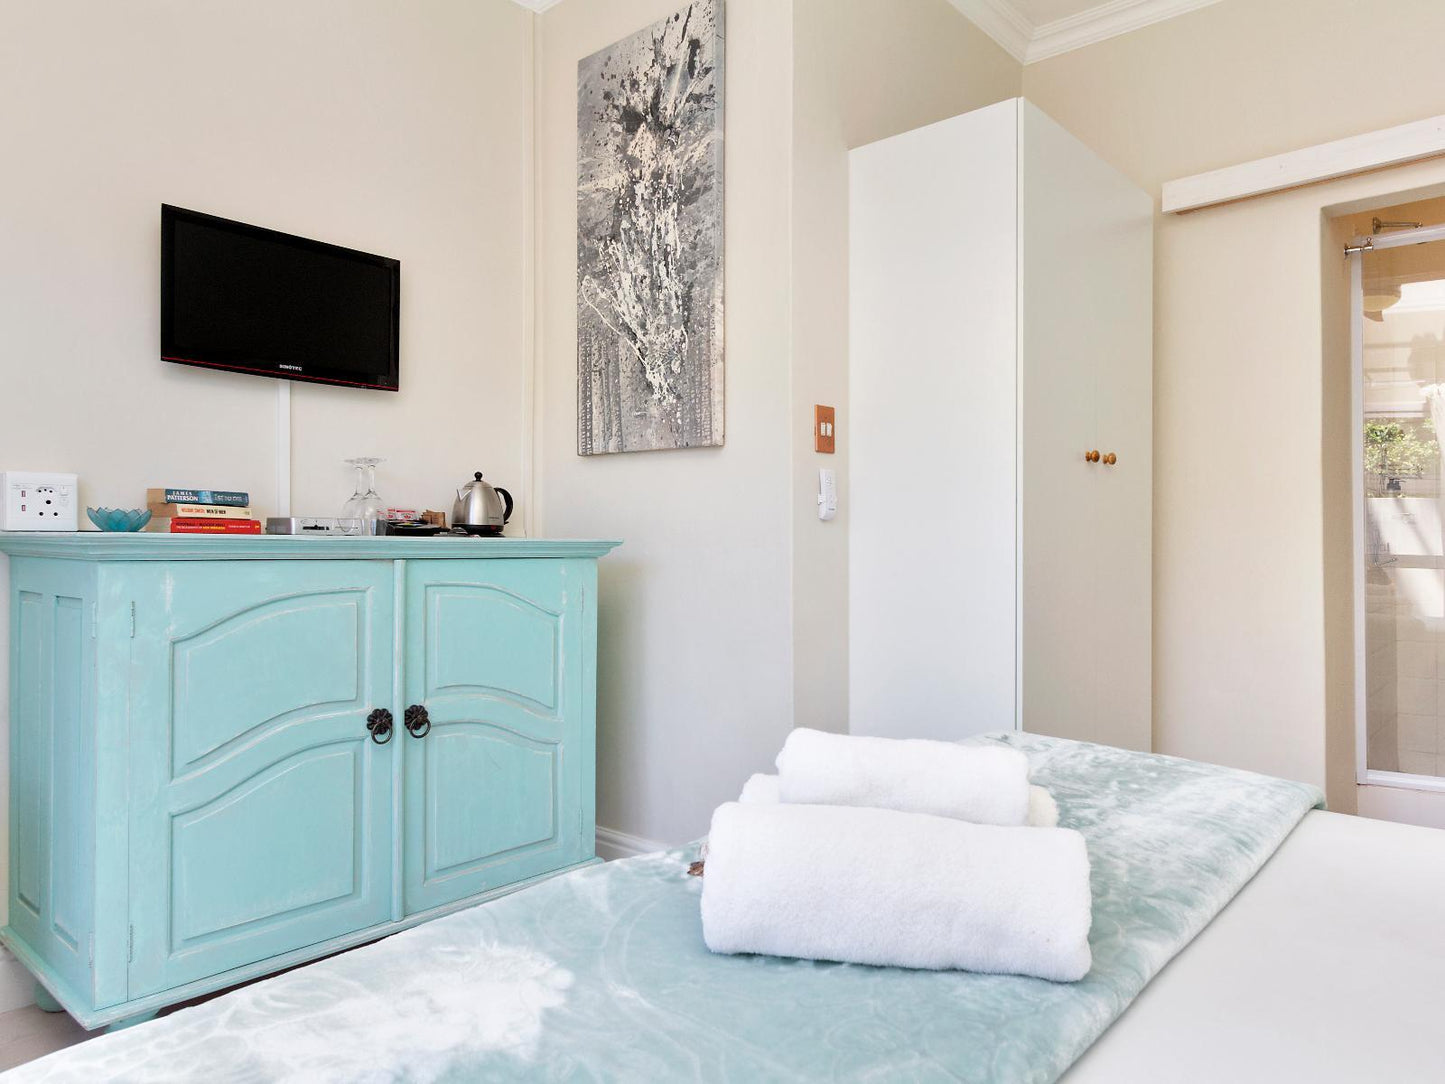 Standard Room 5 Queen size Bed @ Beach House Guest House - Hout Bay